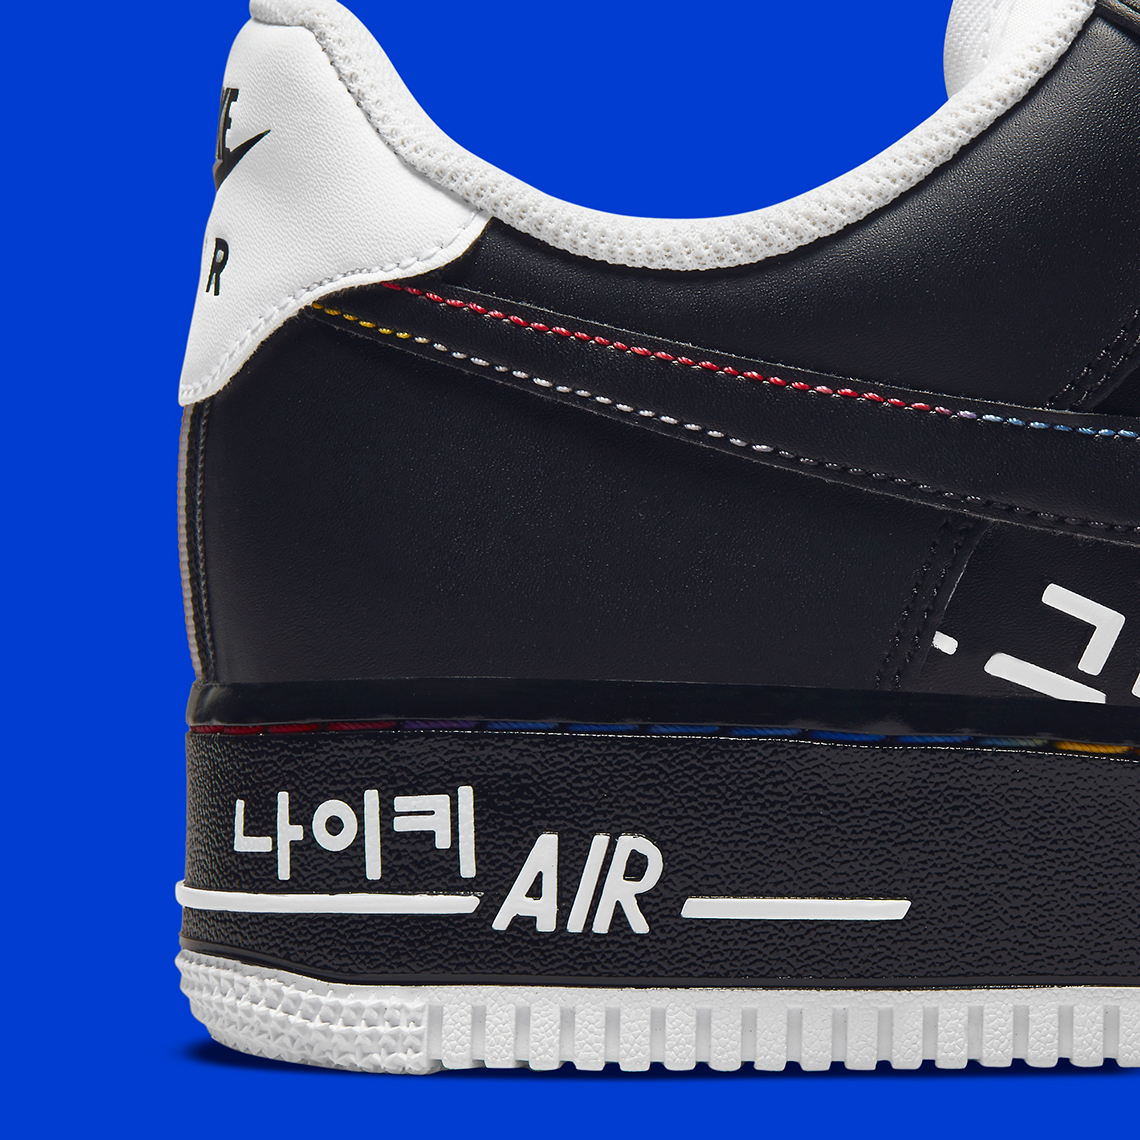 Nike Air Force 1 Low Hangul Day DO2701-715 Release Date